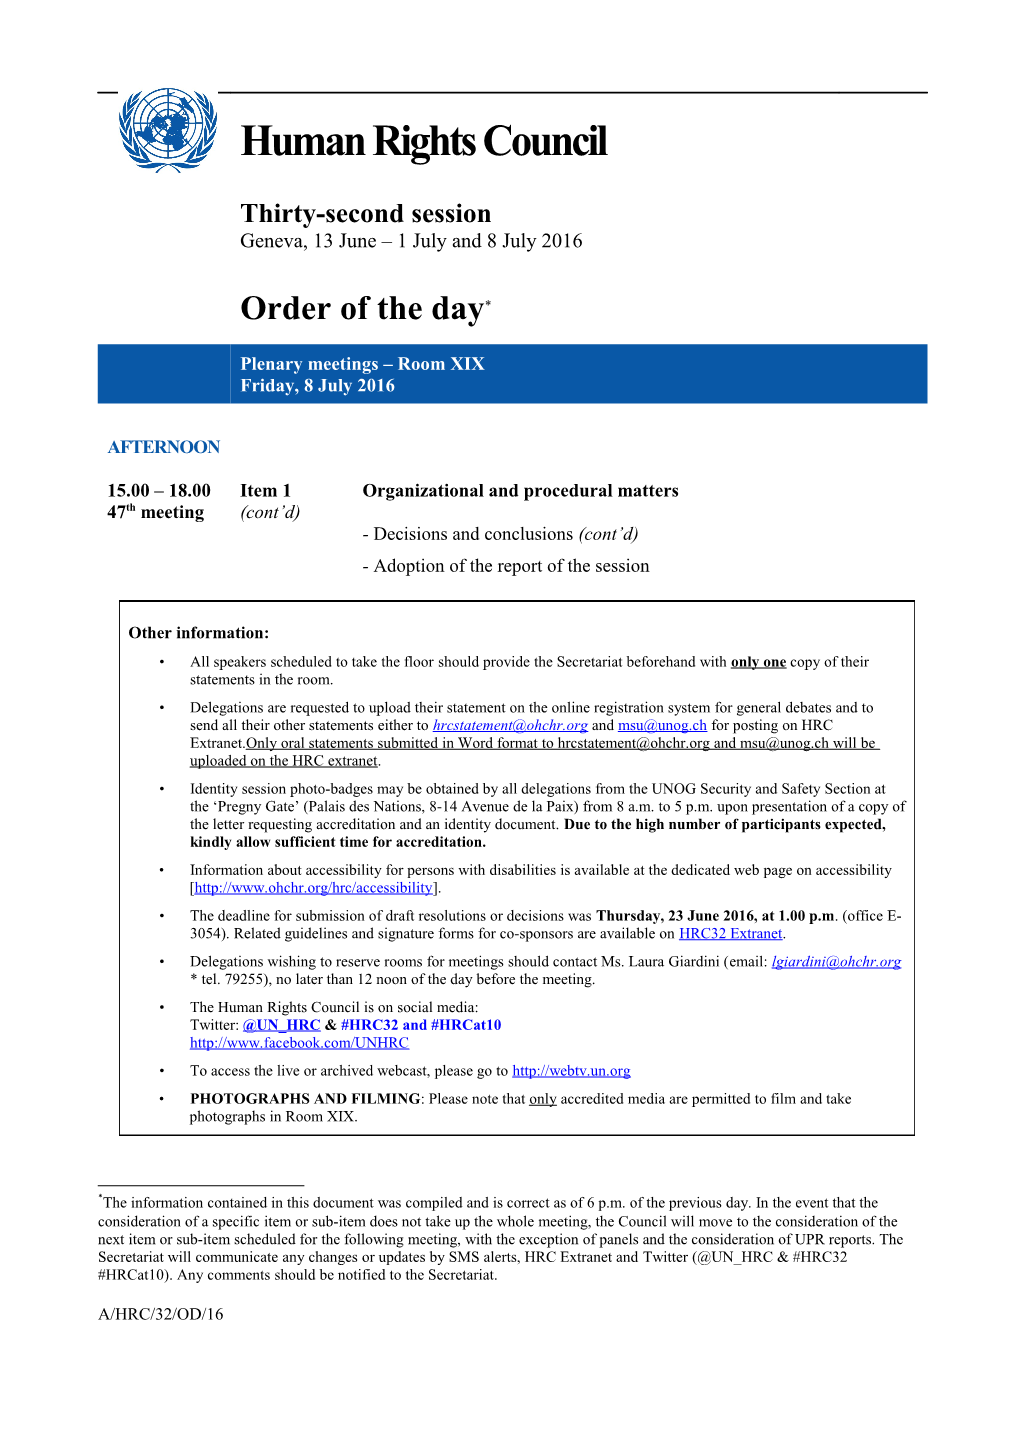 Order of the Day, Friday, 1 July 2016